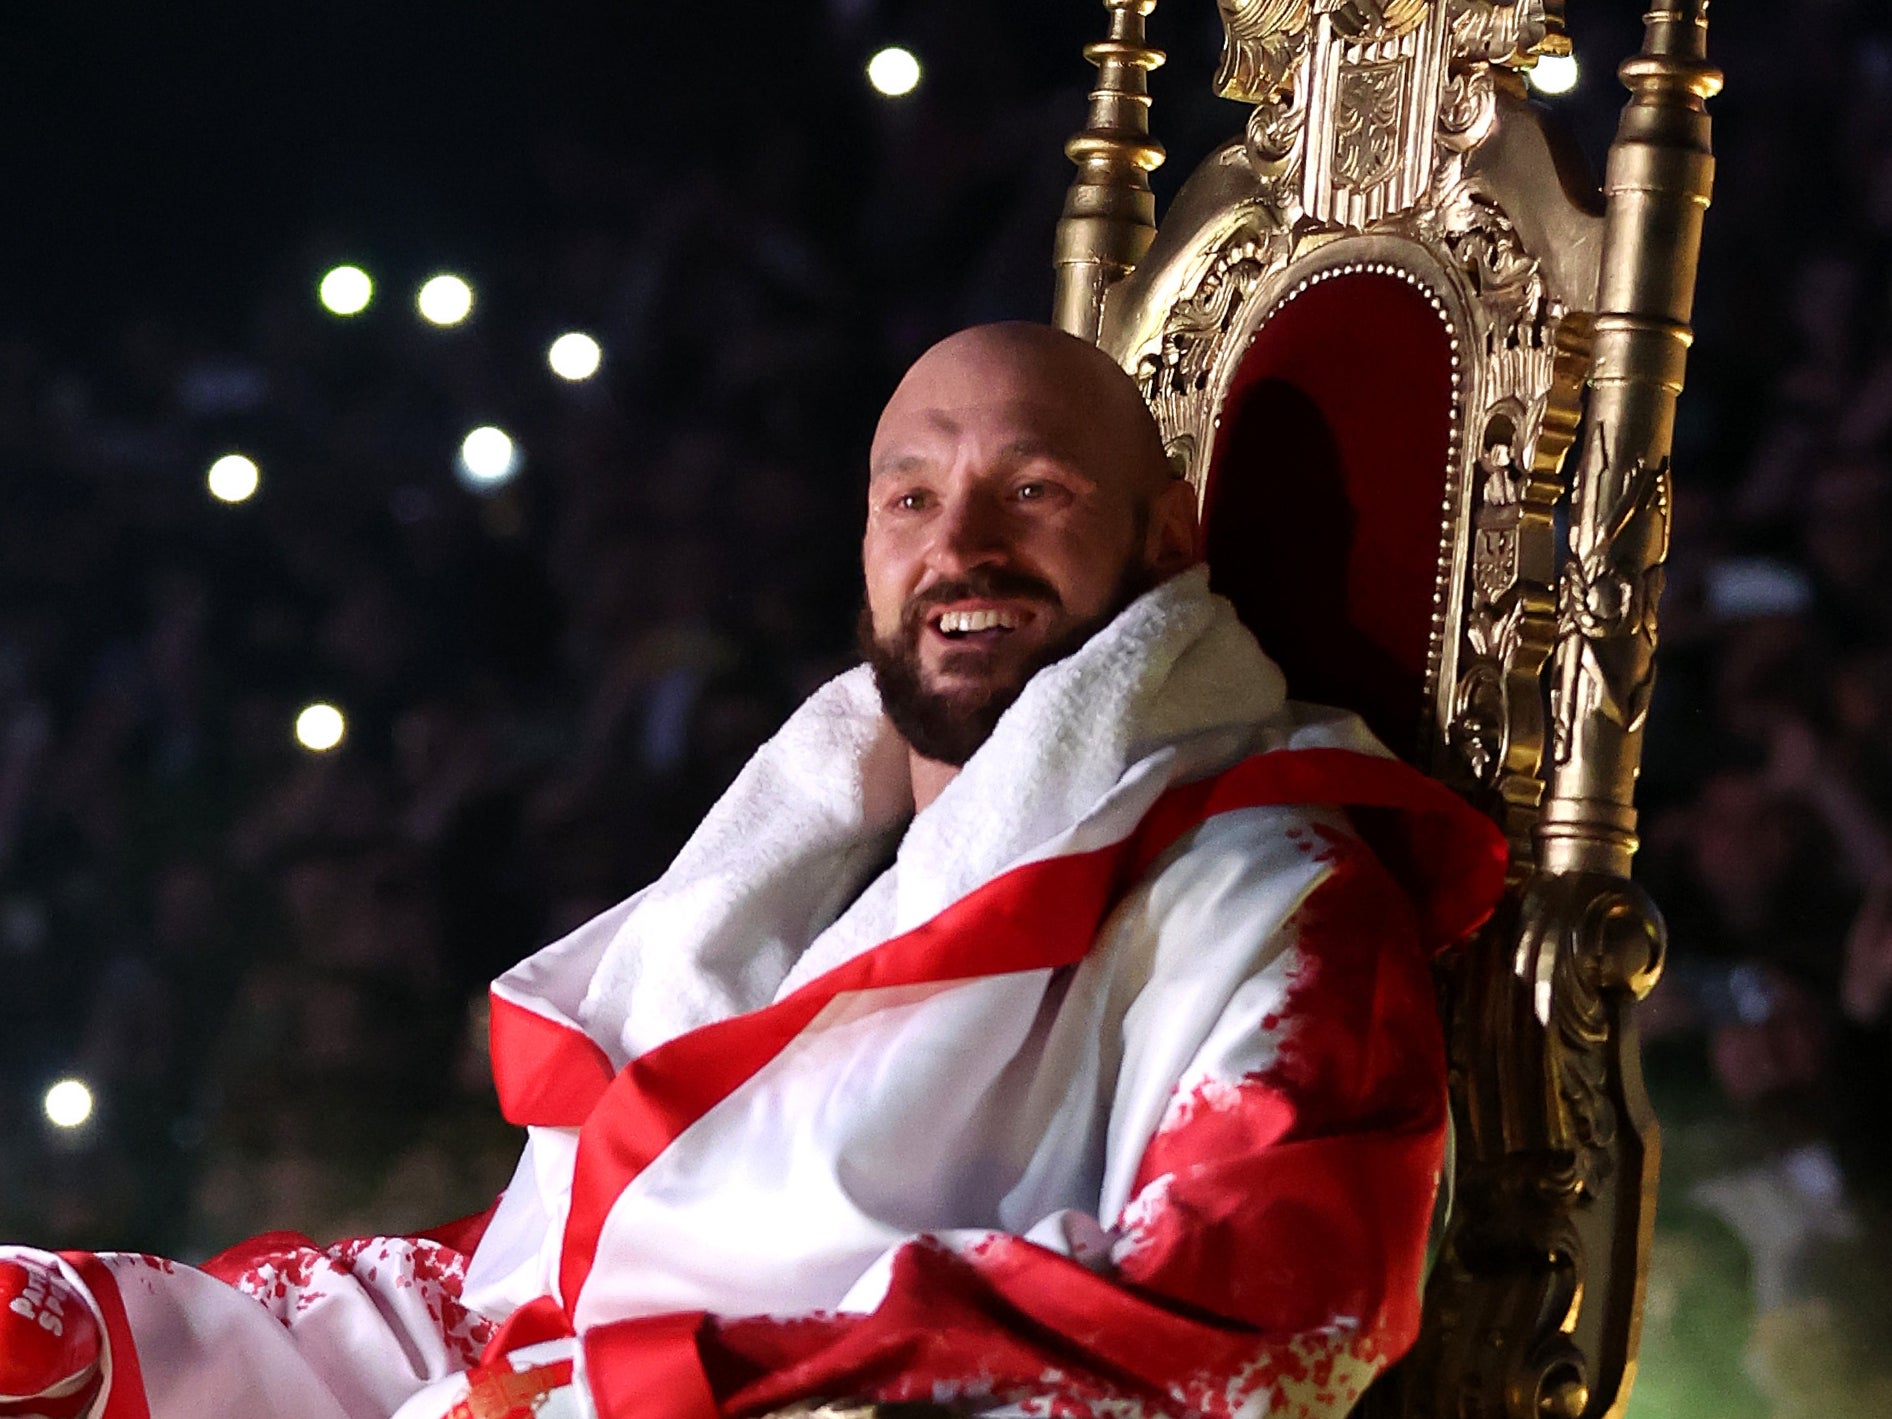 Tyson Fury on his way to the ring before his knockout of Dillian Whyte